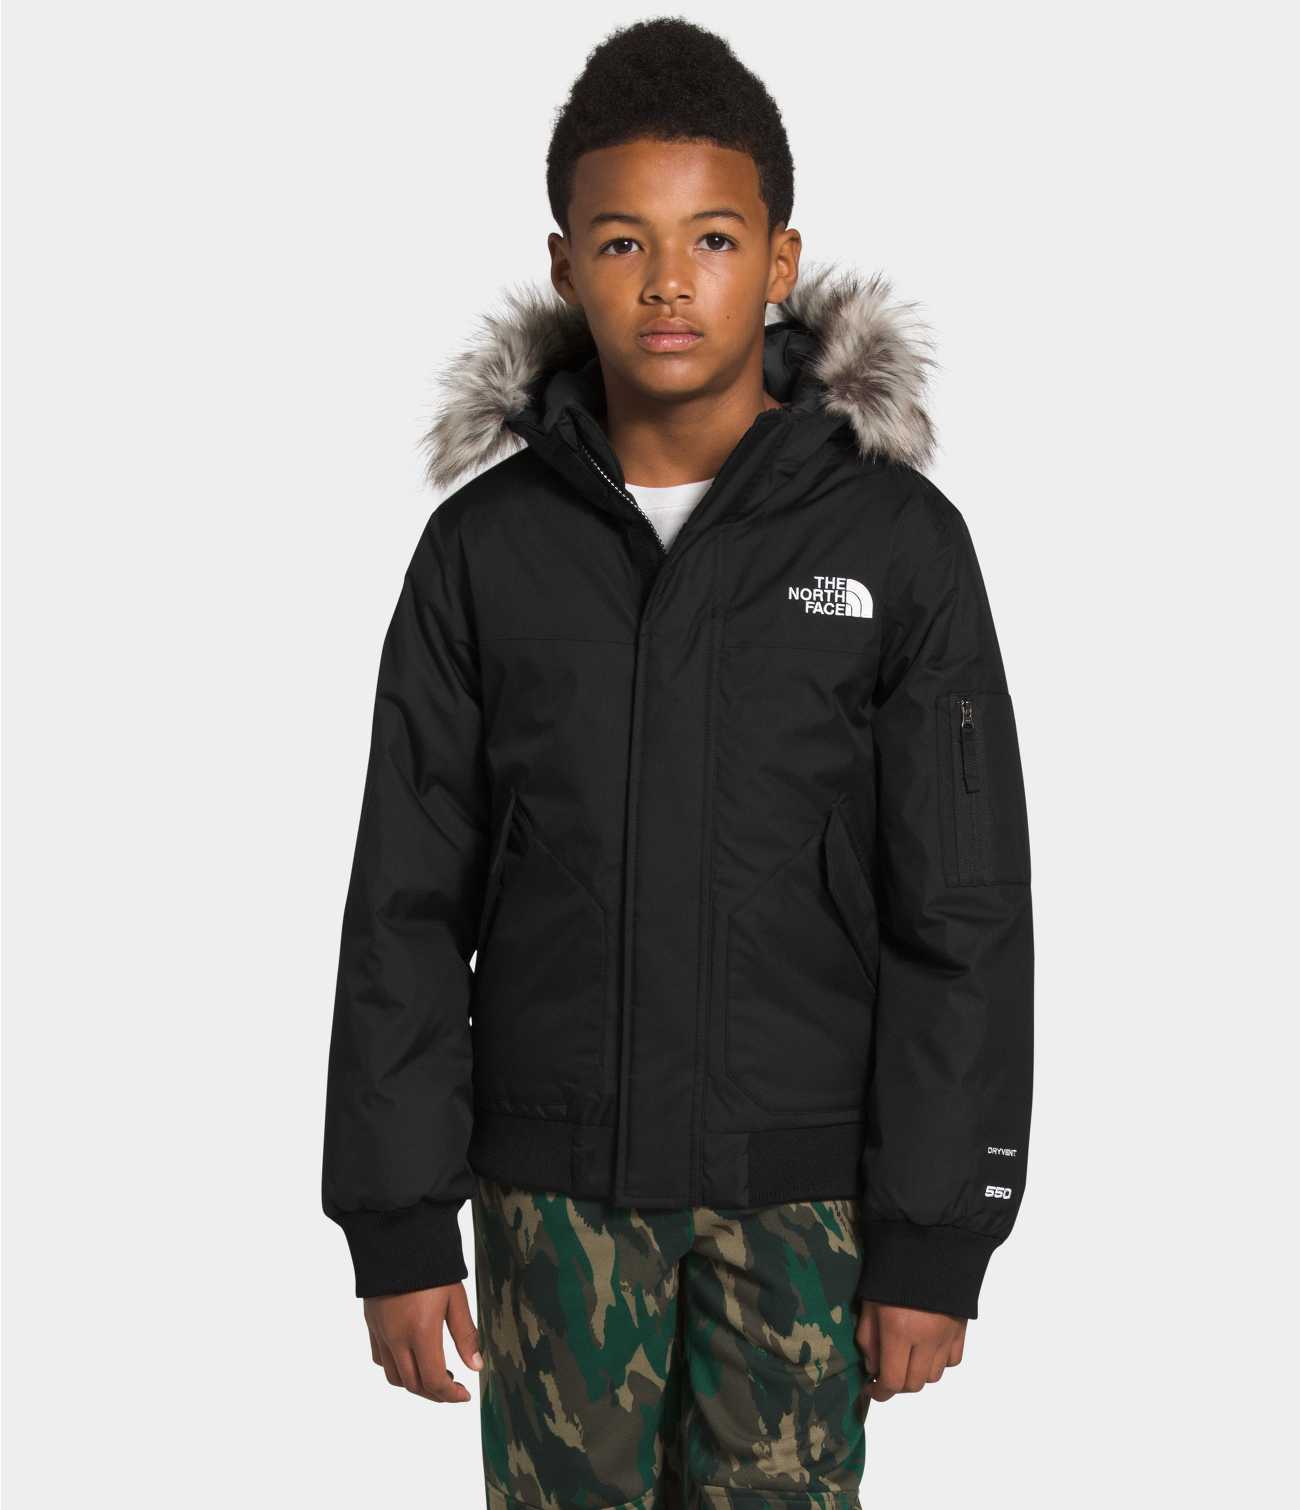 Supreme, The North Face Mountain Parka  Size M Available For Immediate  Sale At Sotheby's